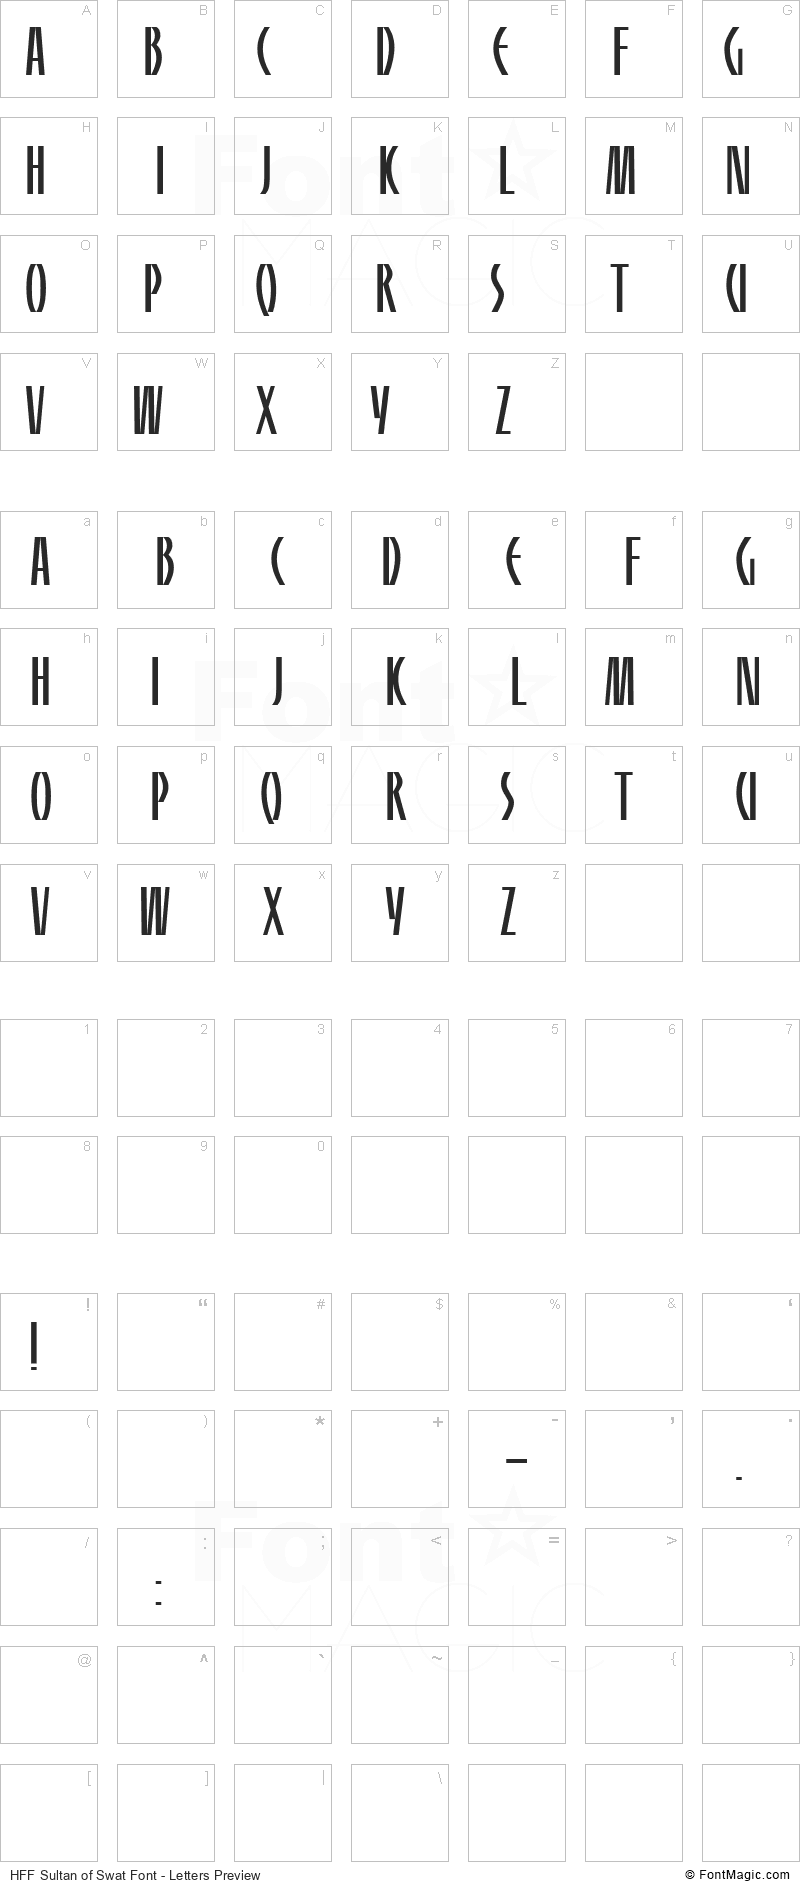 HFF Sultan of Swat Font - All Latters Preview Chart